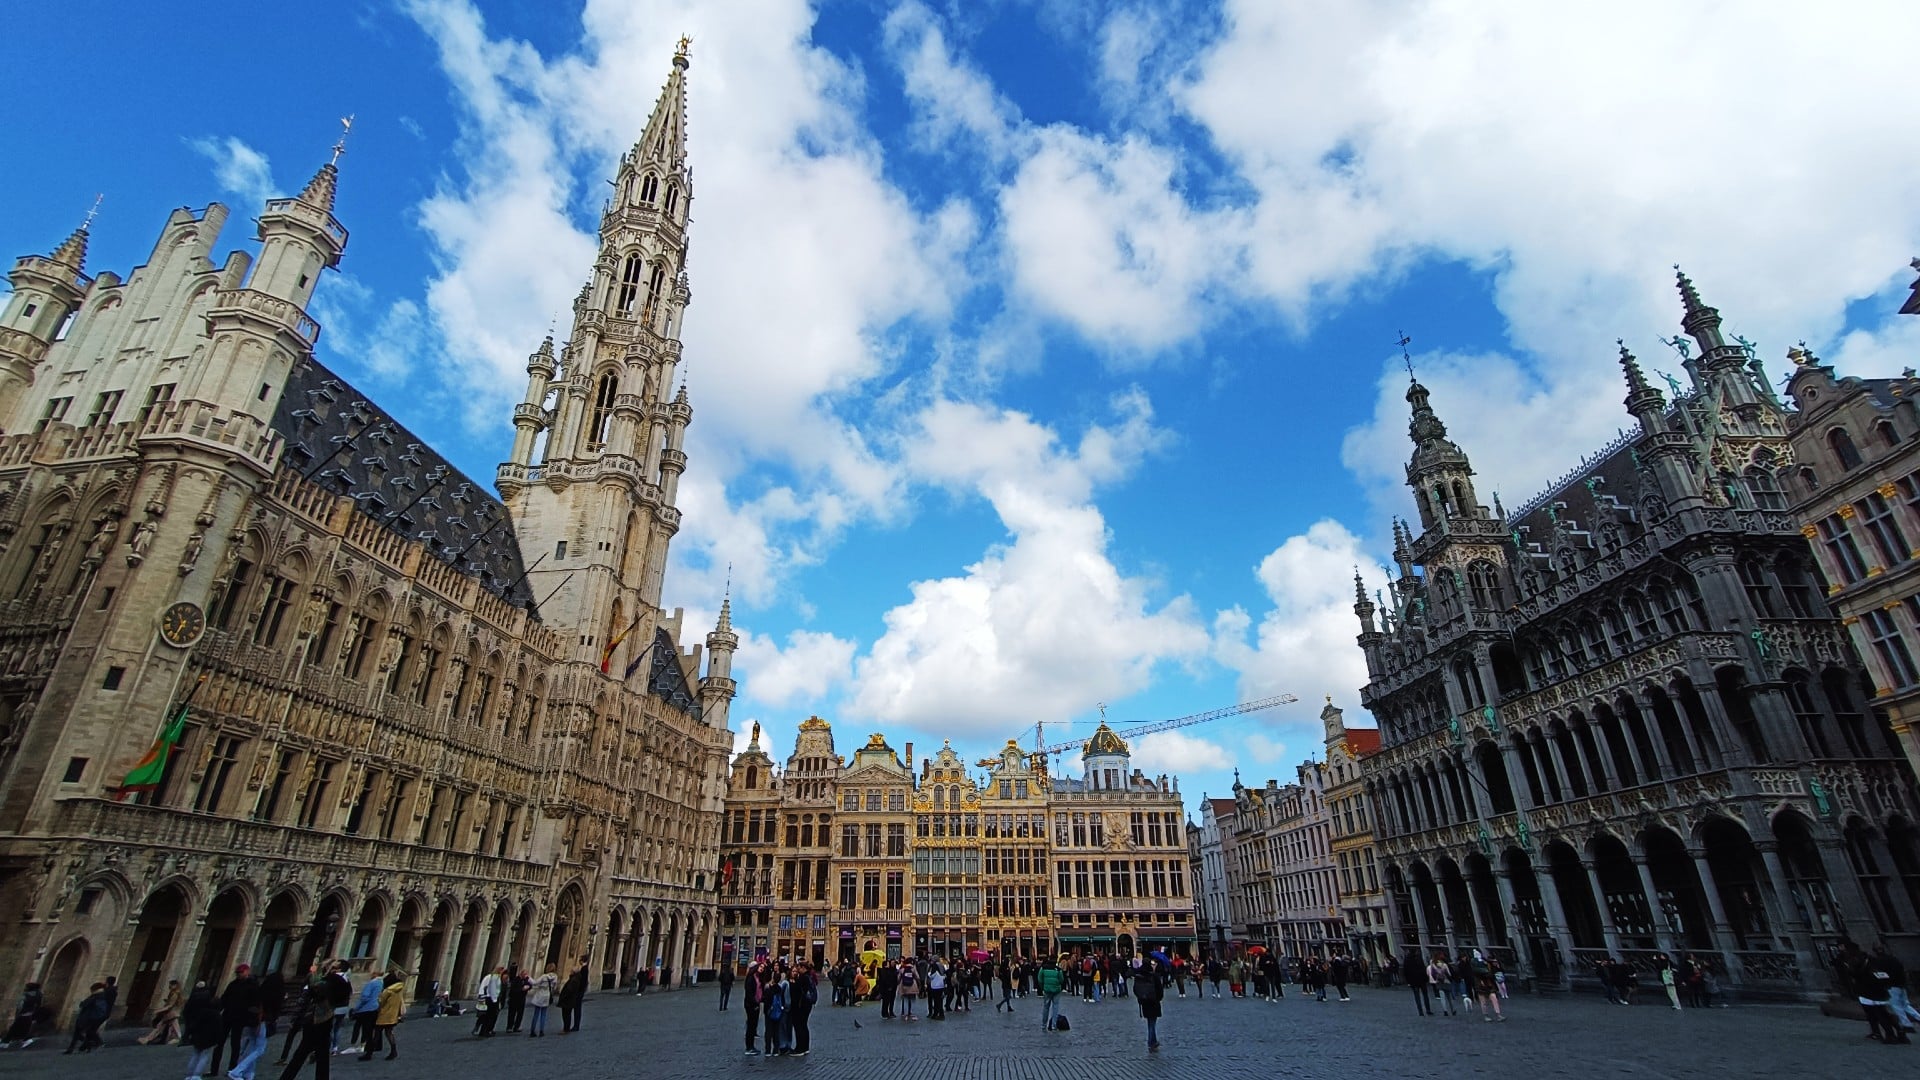 Bound by the grand boulevards built on the city's former defensive walls, Brussels' Pentagon contains some of the most famous attractions in the Belgian capital making it the best area to stay in BXL for tourists